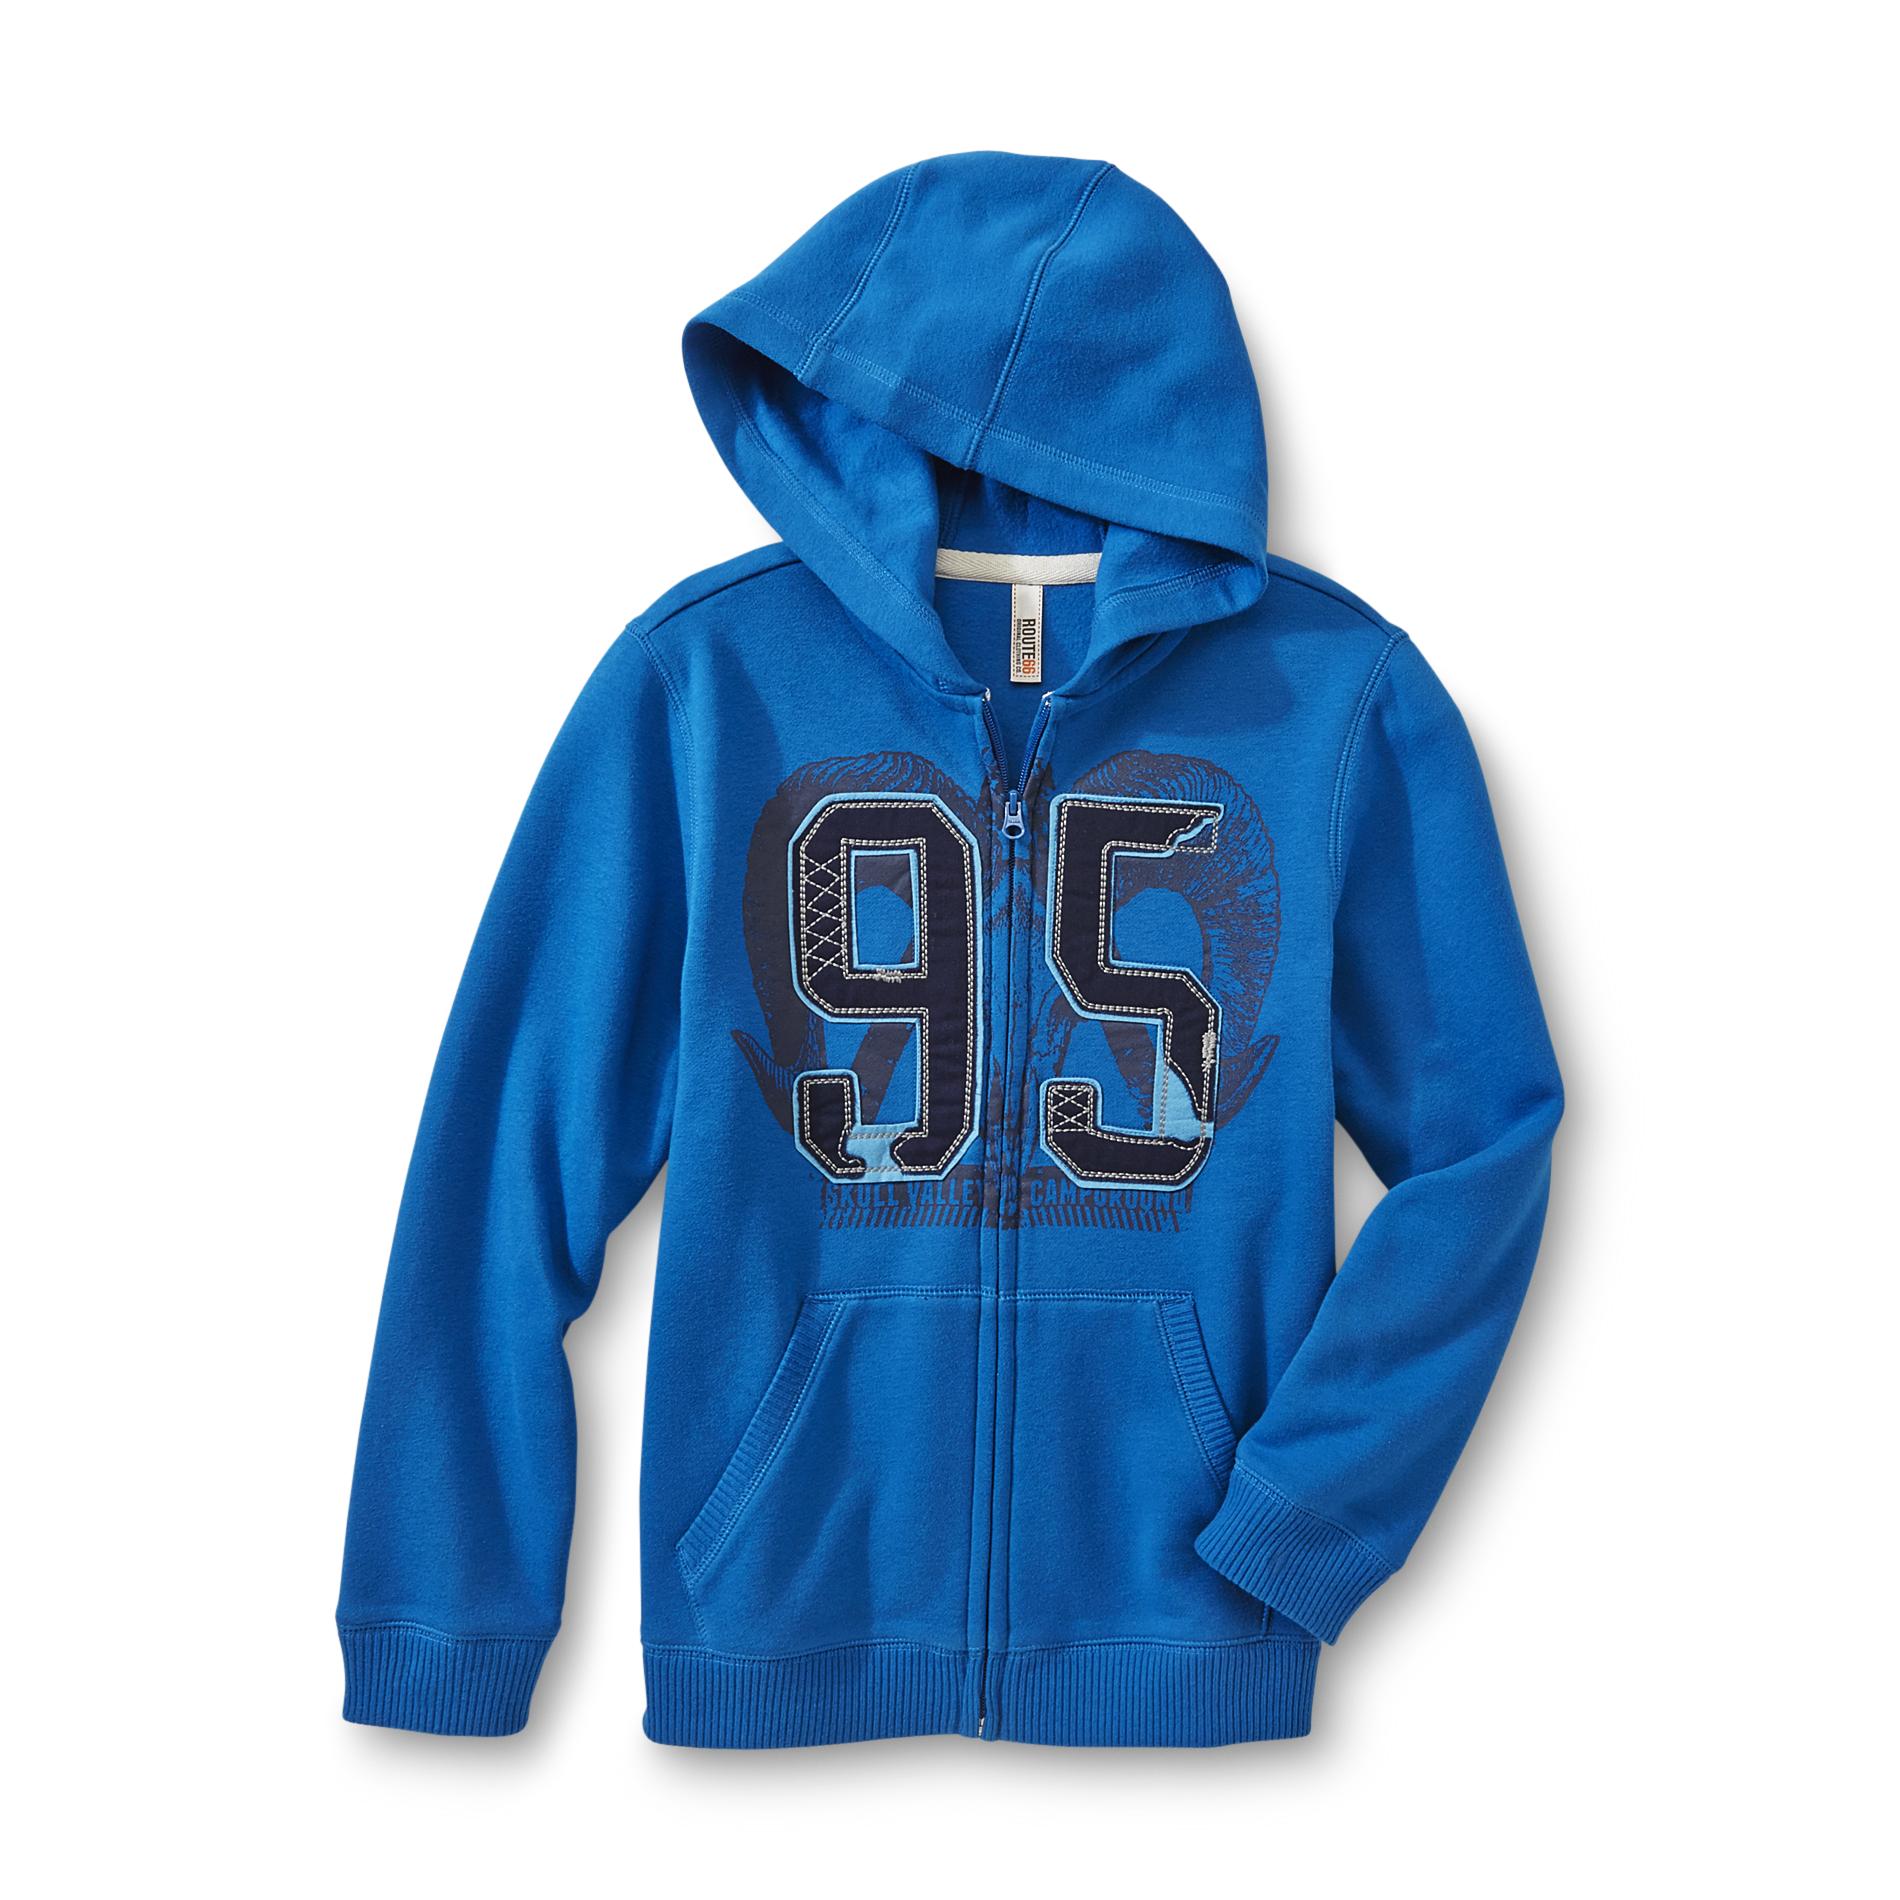 Route 66 Boy's Graphic Hoodie Jacket - Skull Valley 95